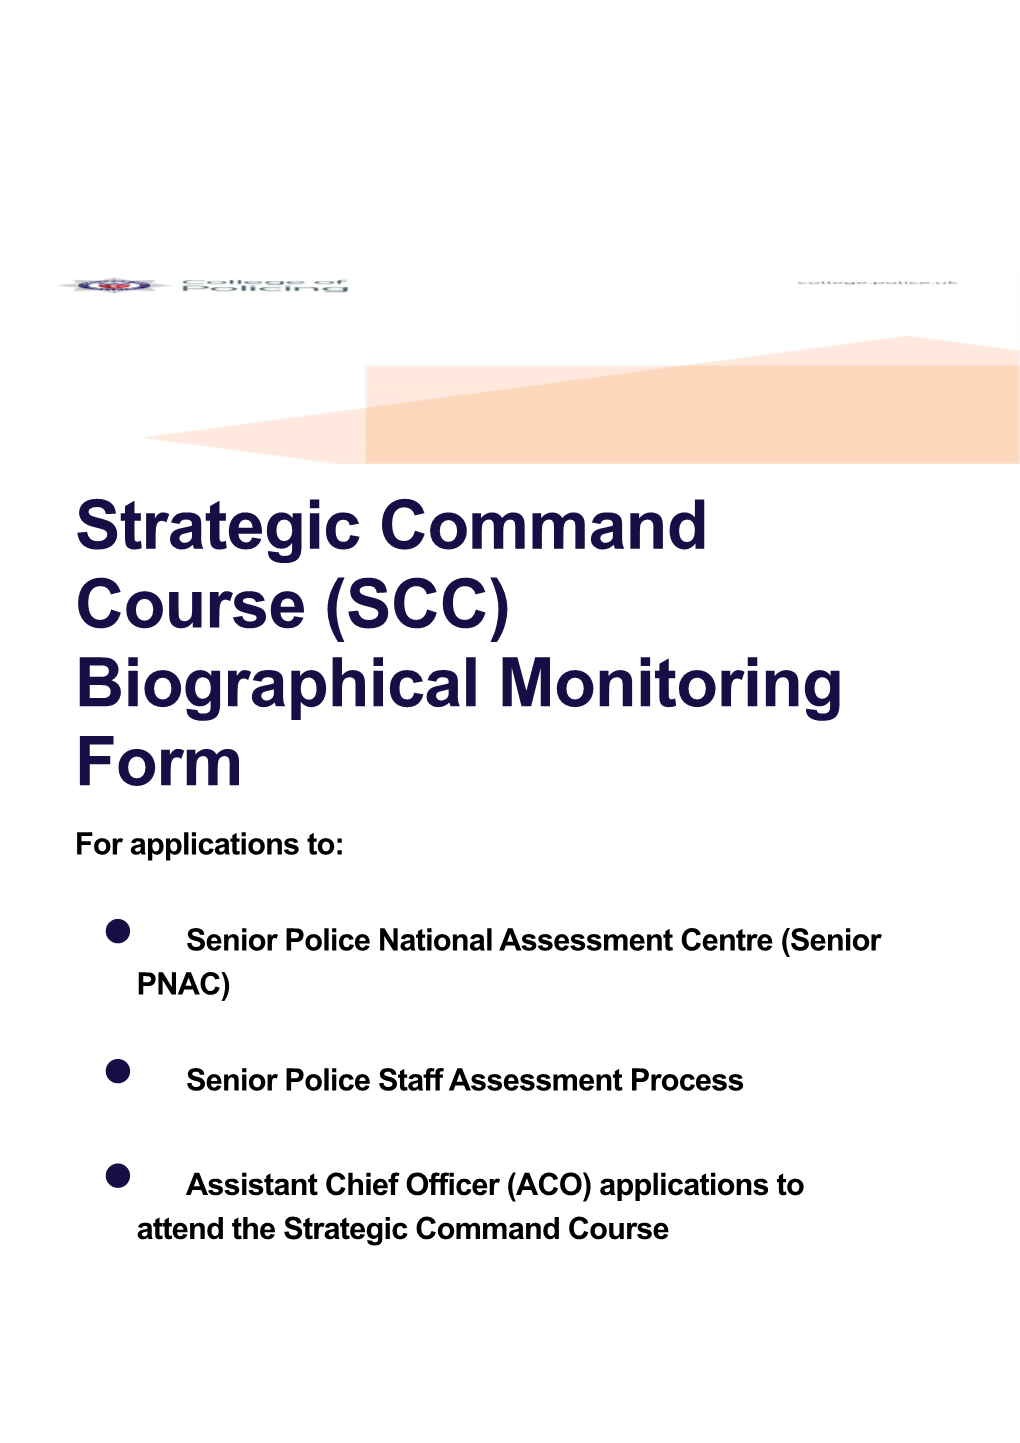 Strategic Command Course (SCC) Biographical Monitoring Form